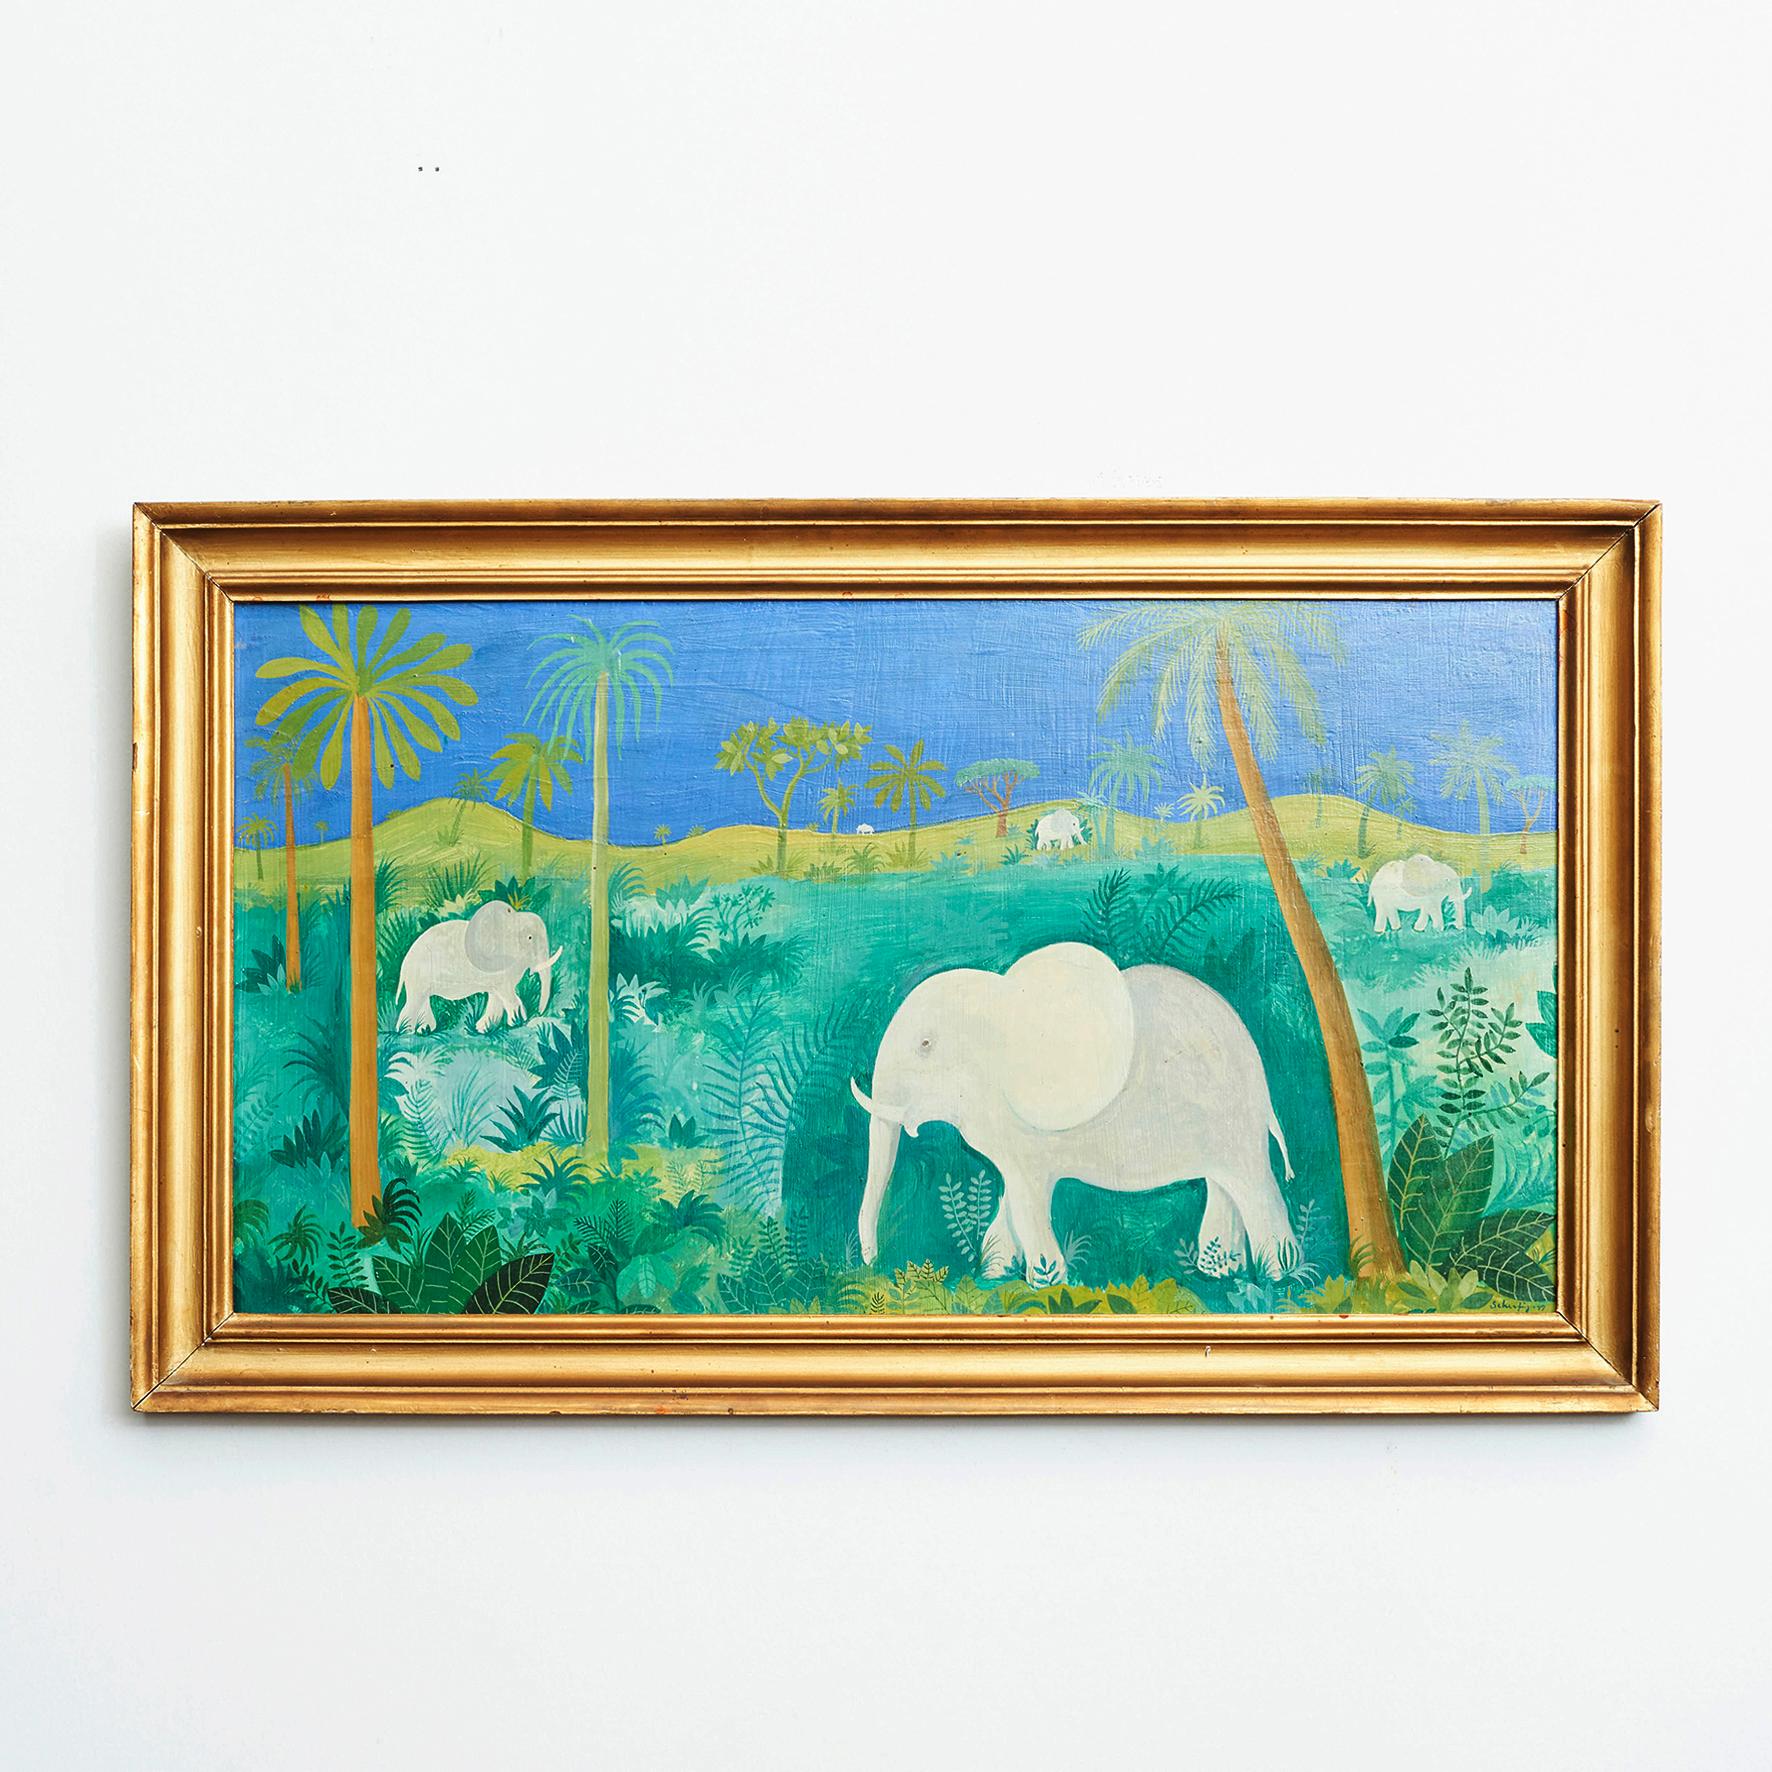 Hans Scherfig, (1905-1979). Danish painter.
White elephants in jungle.
Tempera on masonite. Signed: Scherfig 47

Measurement (cm):
Height without frame: 43, with frame: 55
With without frame: 81, with frame: 92

According to Buddhist legend,